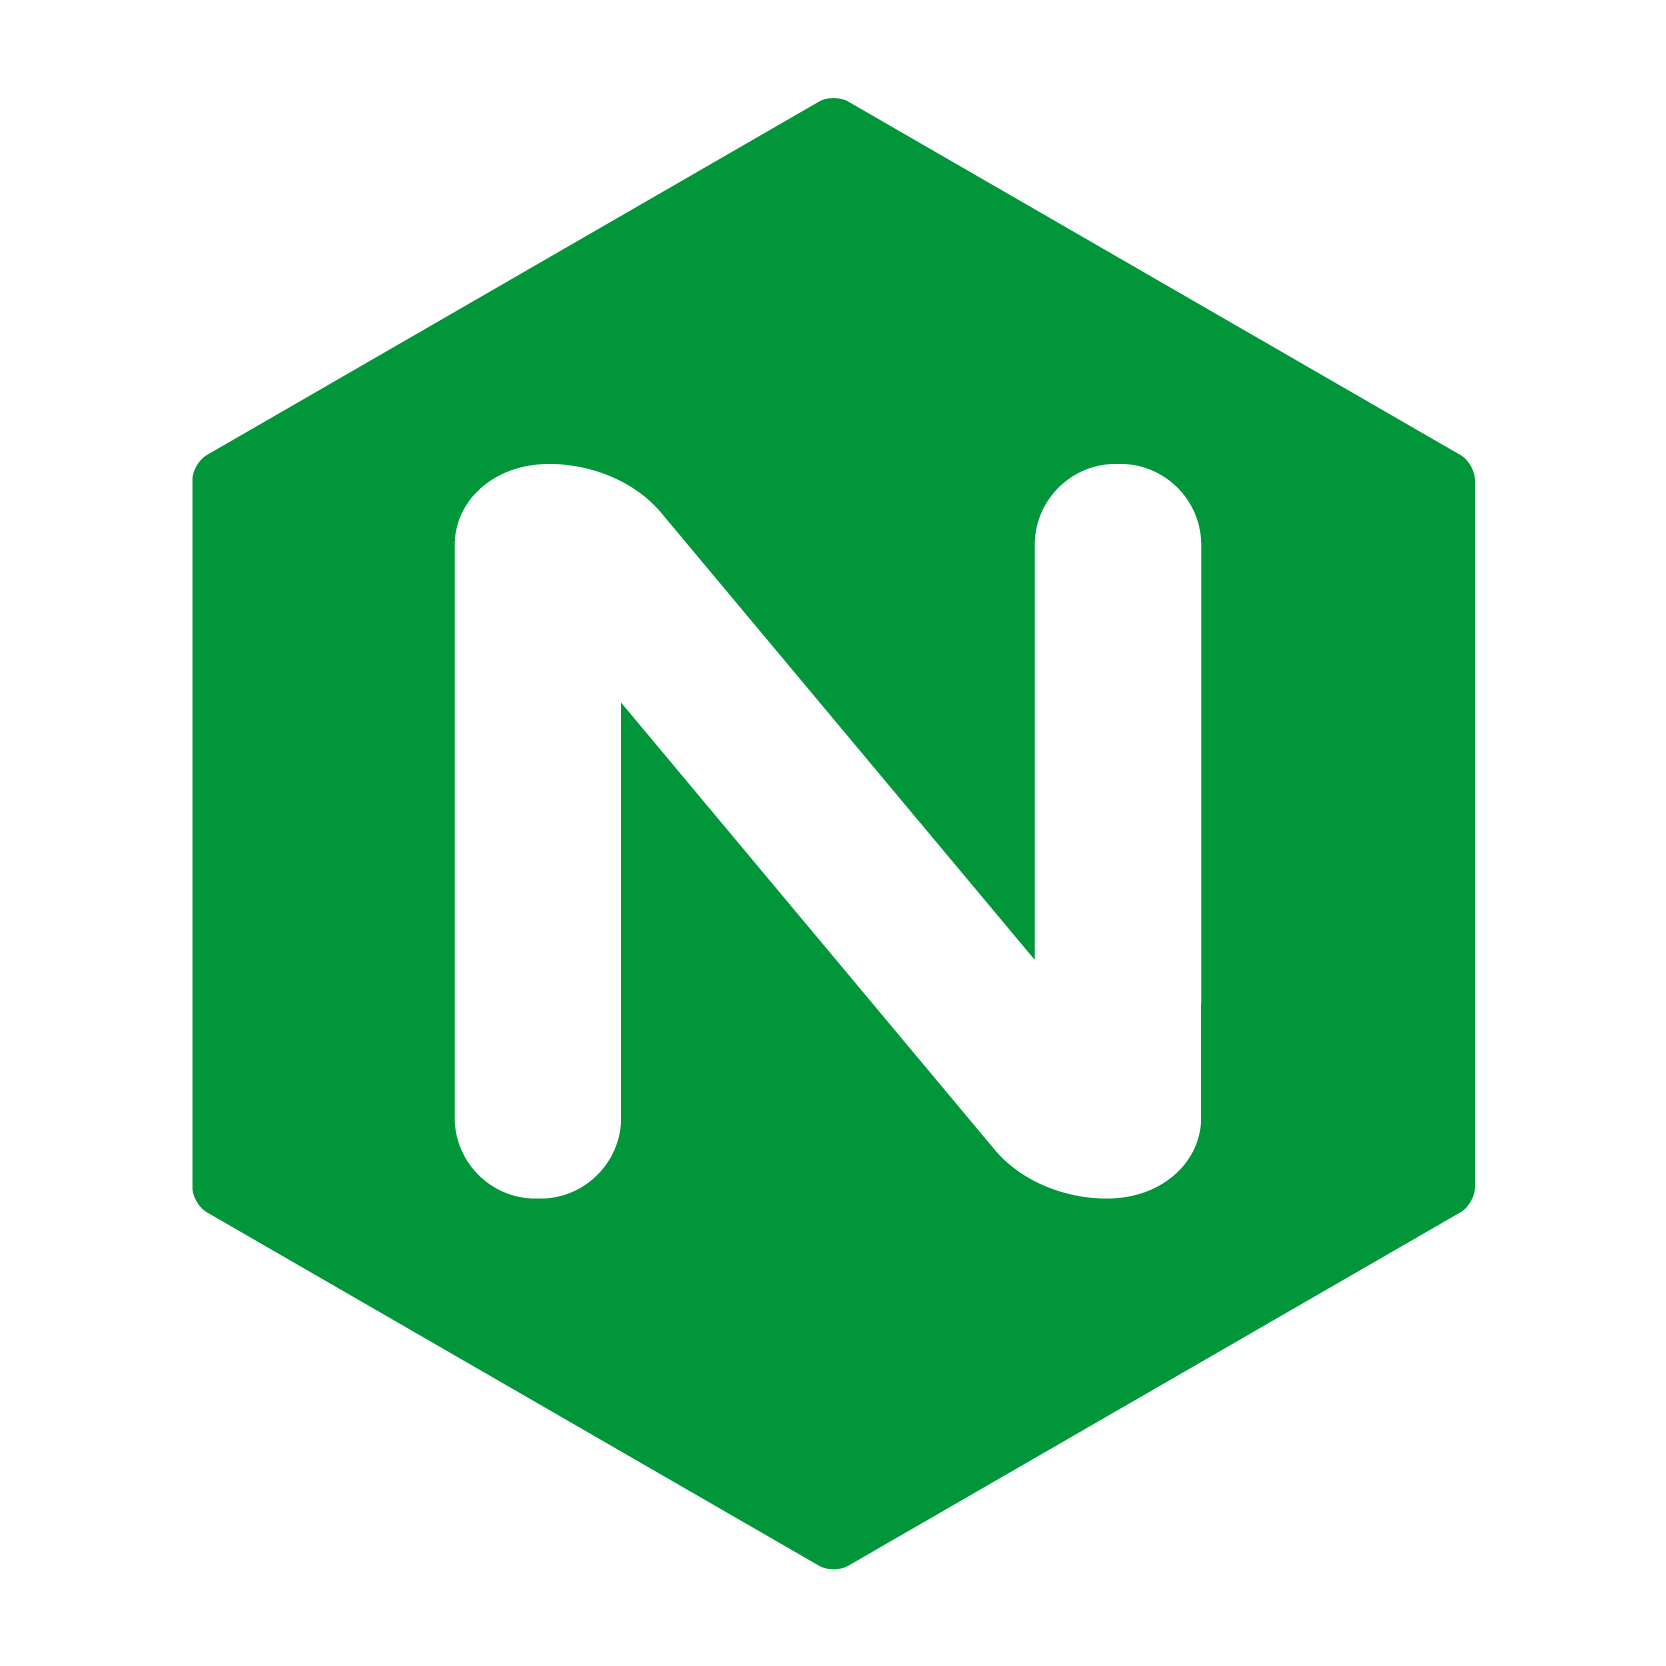 Installing and configuring Nginx on CentOS.